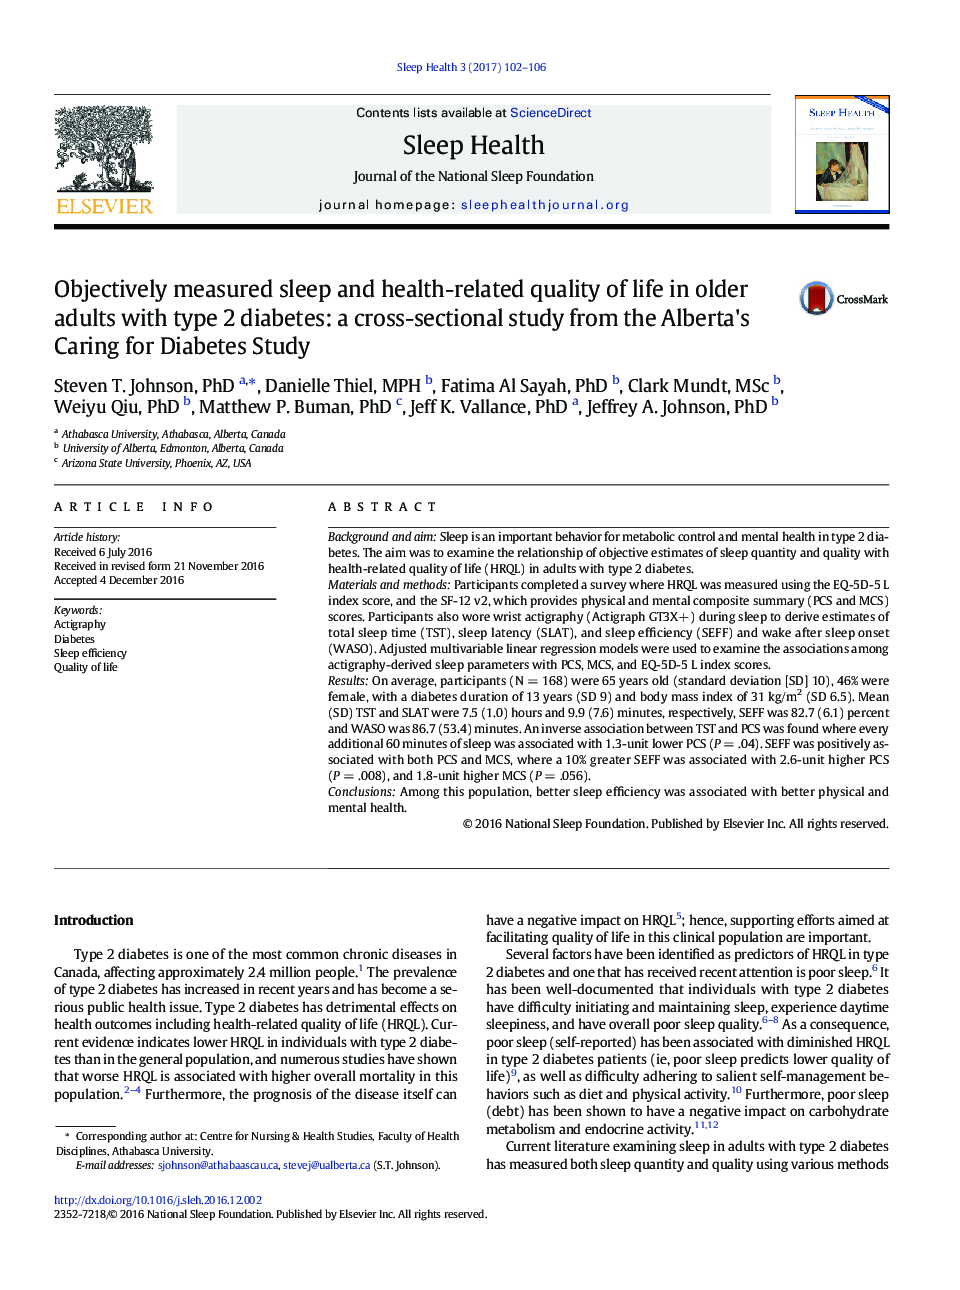 Objectively measured sleep and health-related quality of life in older adults with type 2 diabetes: a cross-sectional study from the Alberta's Caring for Diabetes Study